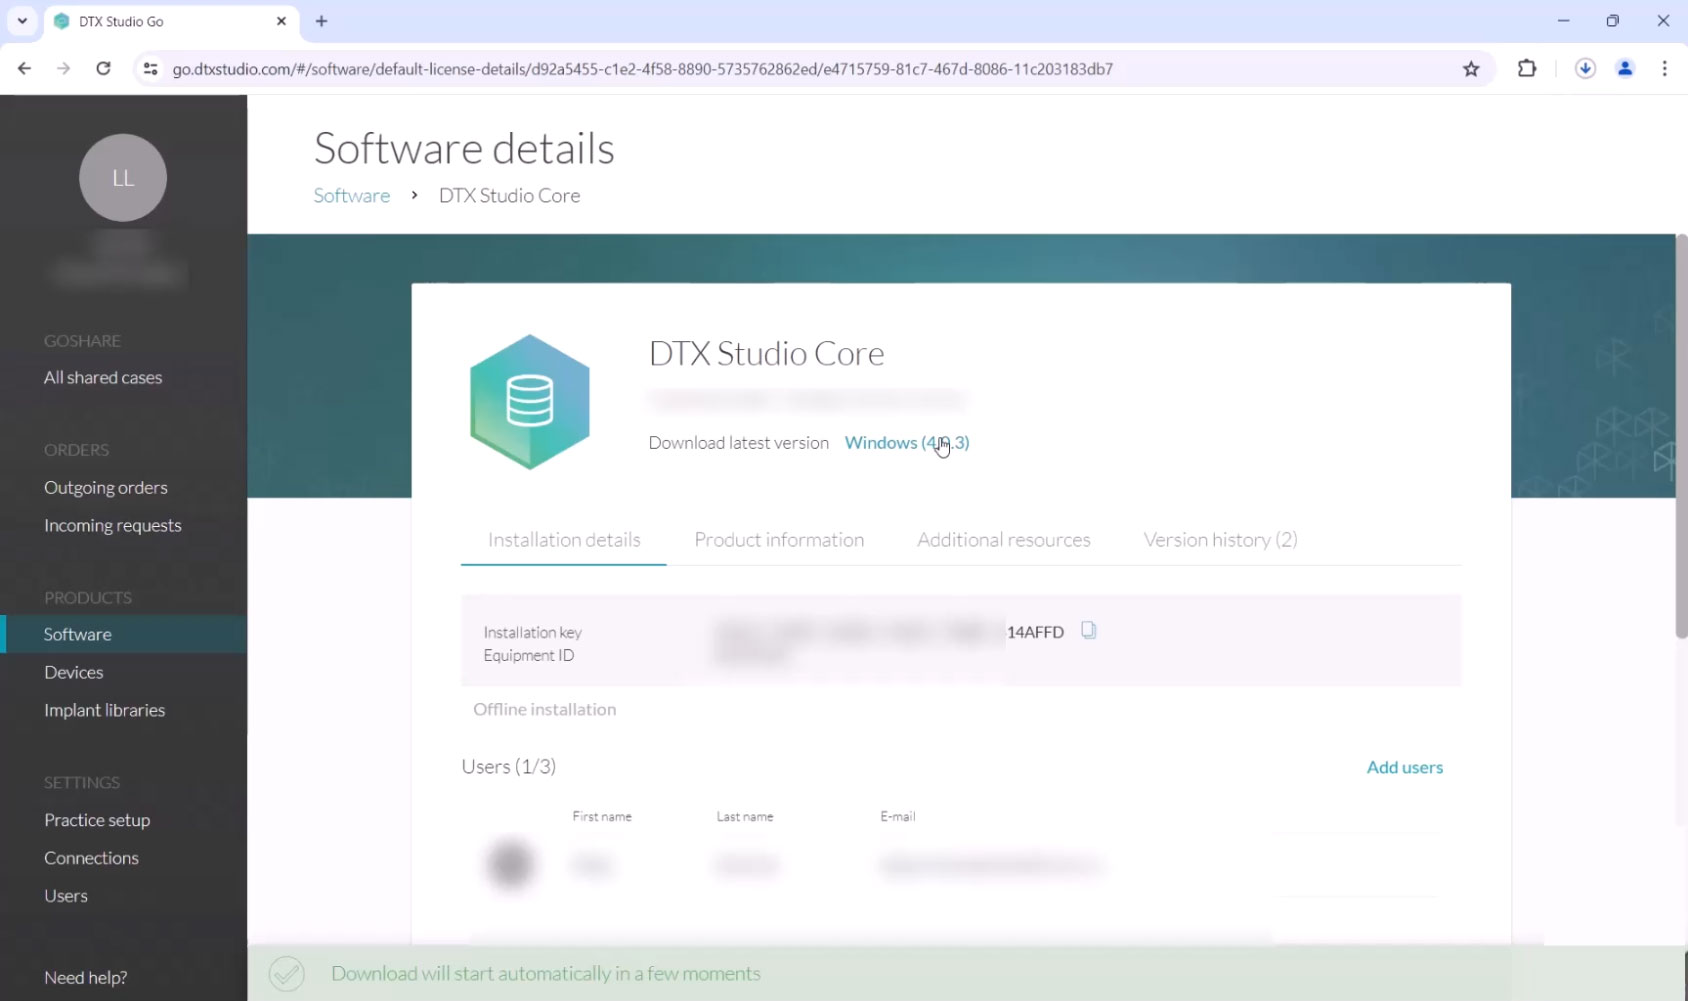 How to Install DTX Studio™ Core